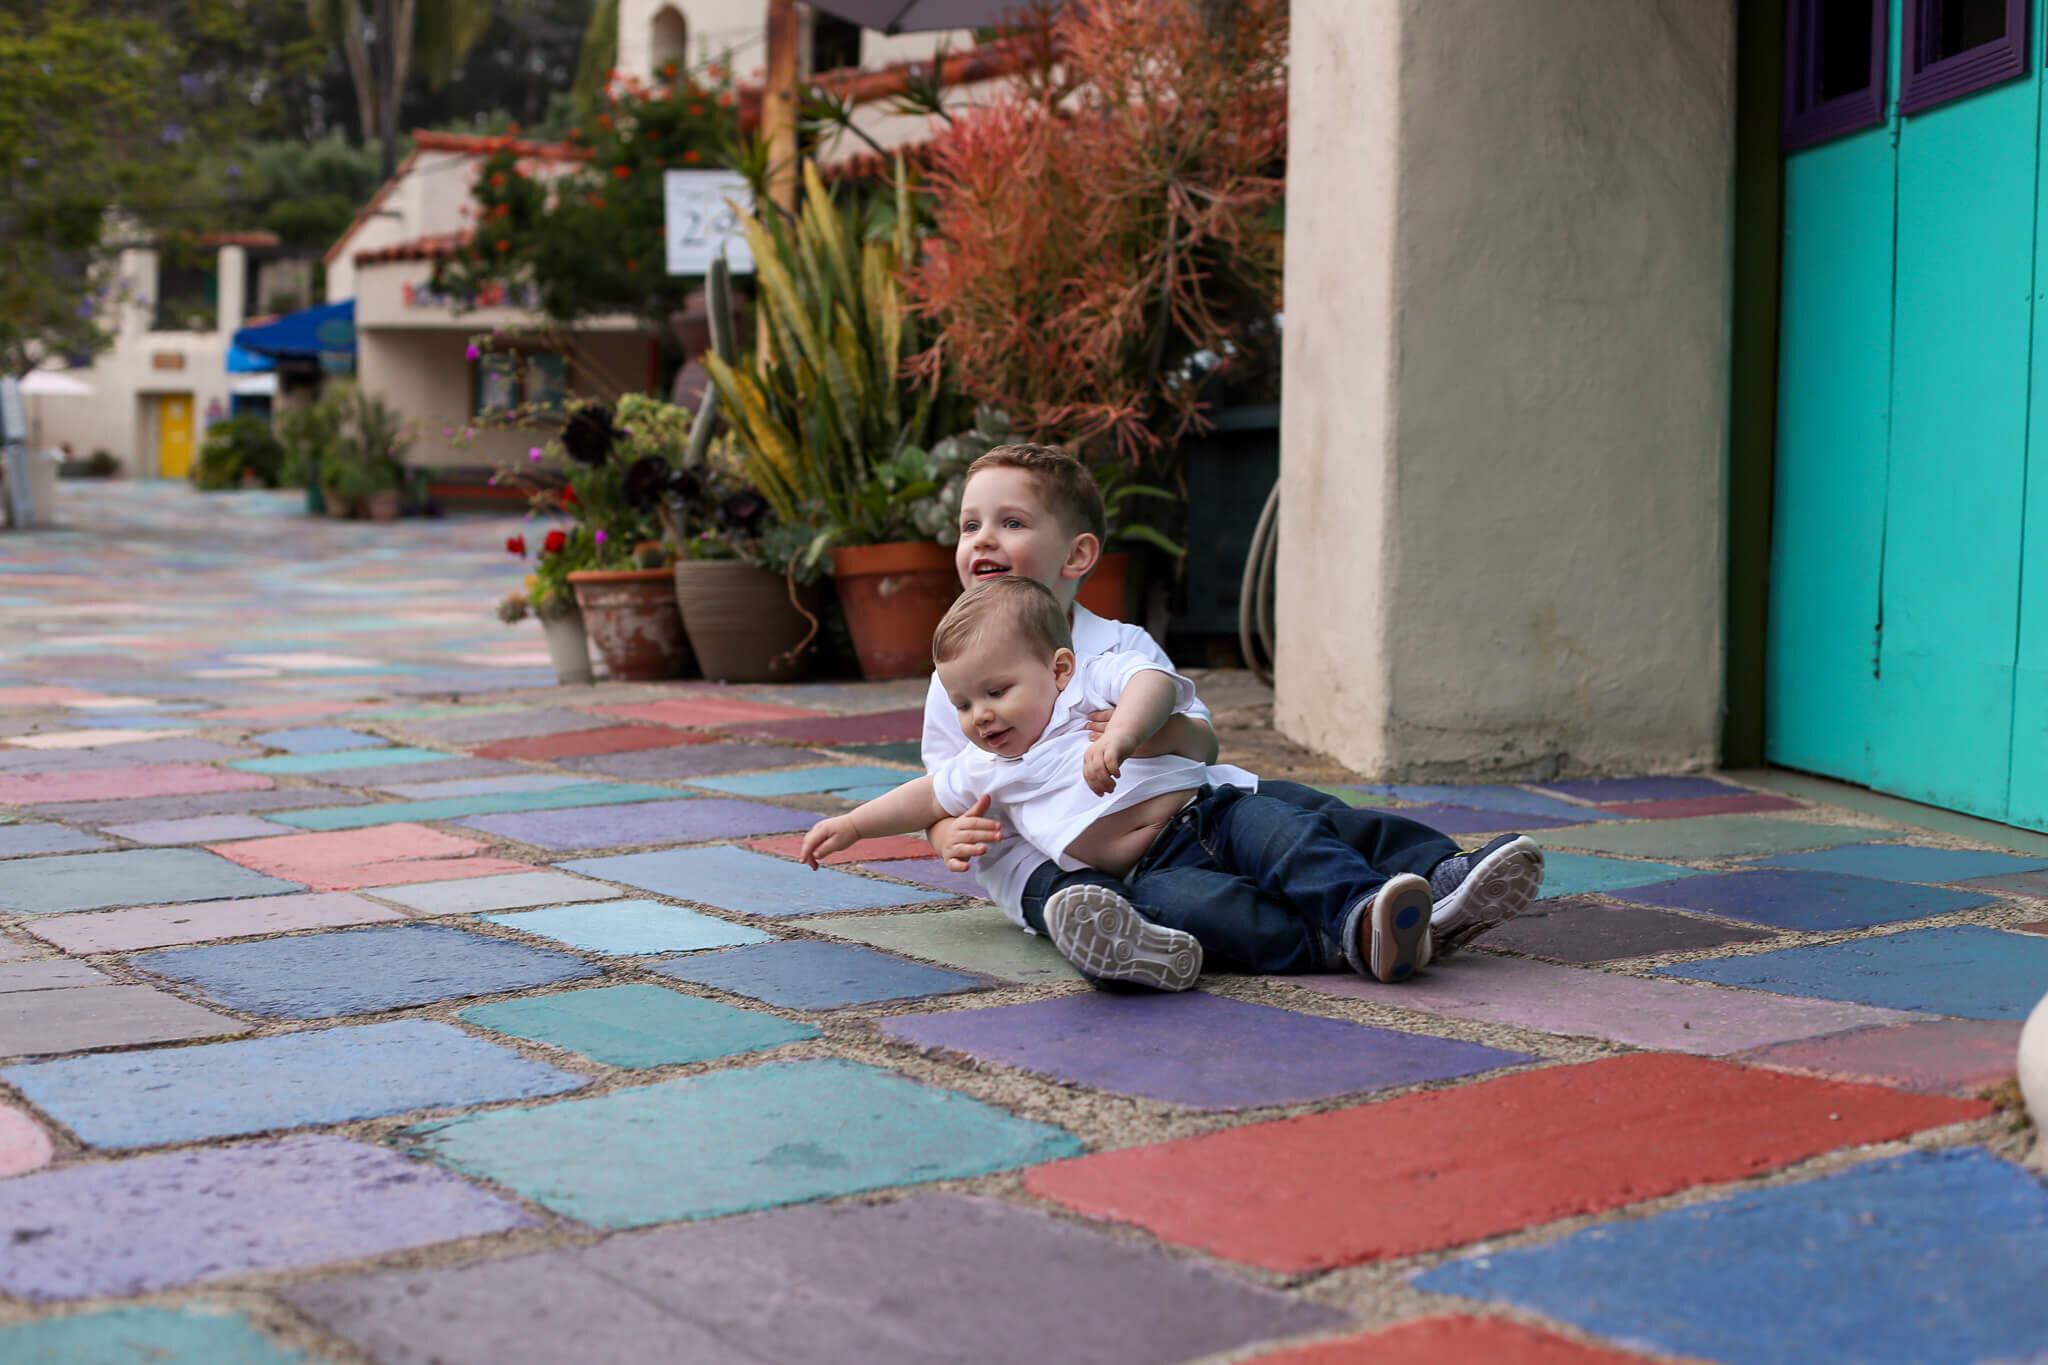  An image of two young siblings having fun wrestling together on a colorful outdoor tiled patio, spending time on a family outing by Photography by L Rose 